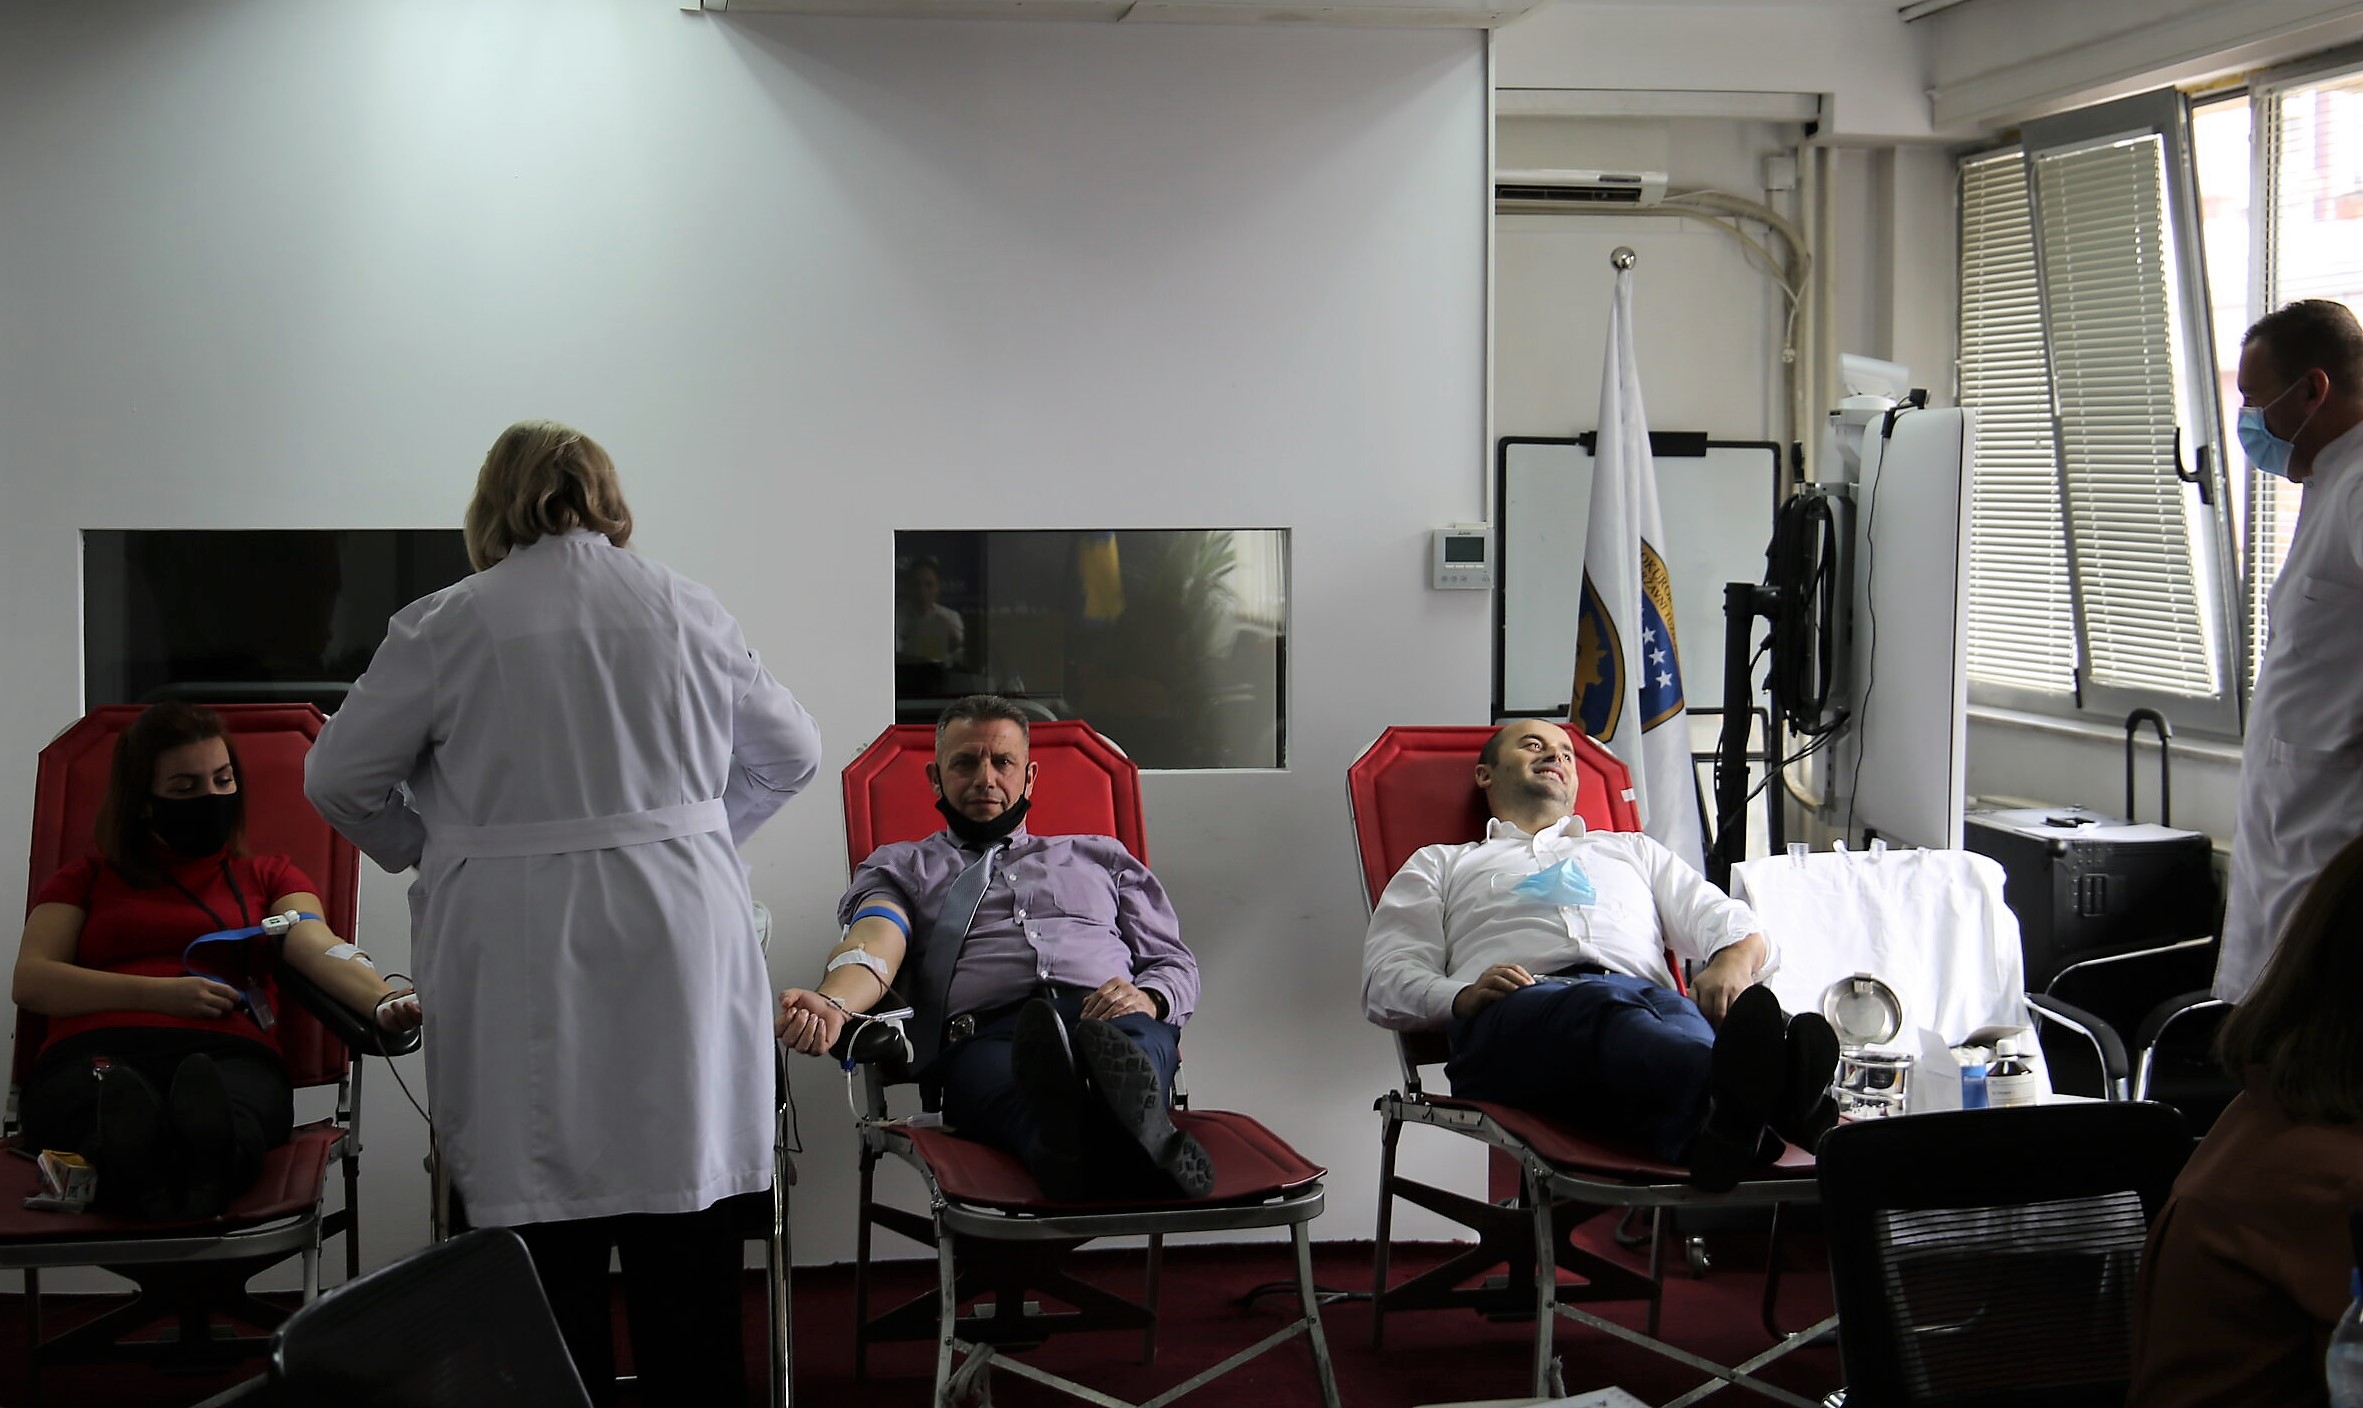 A voluntary blood donation action was held in the prosecutorial system